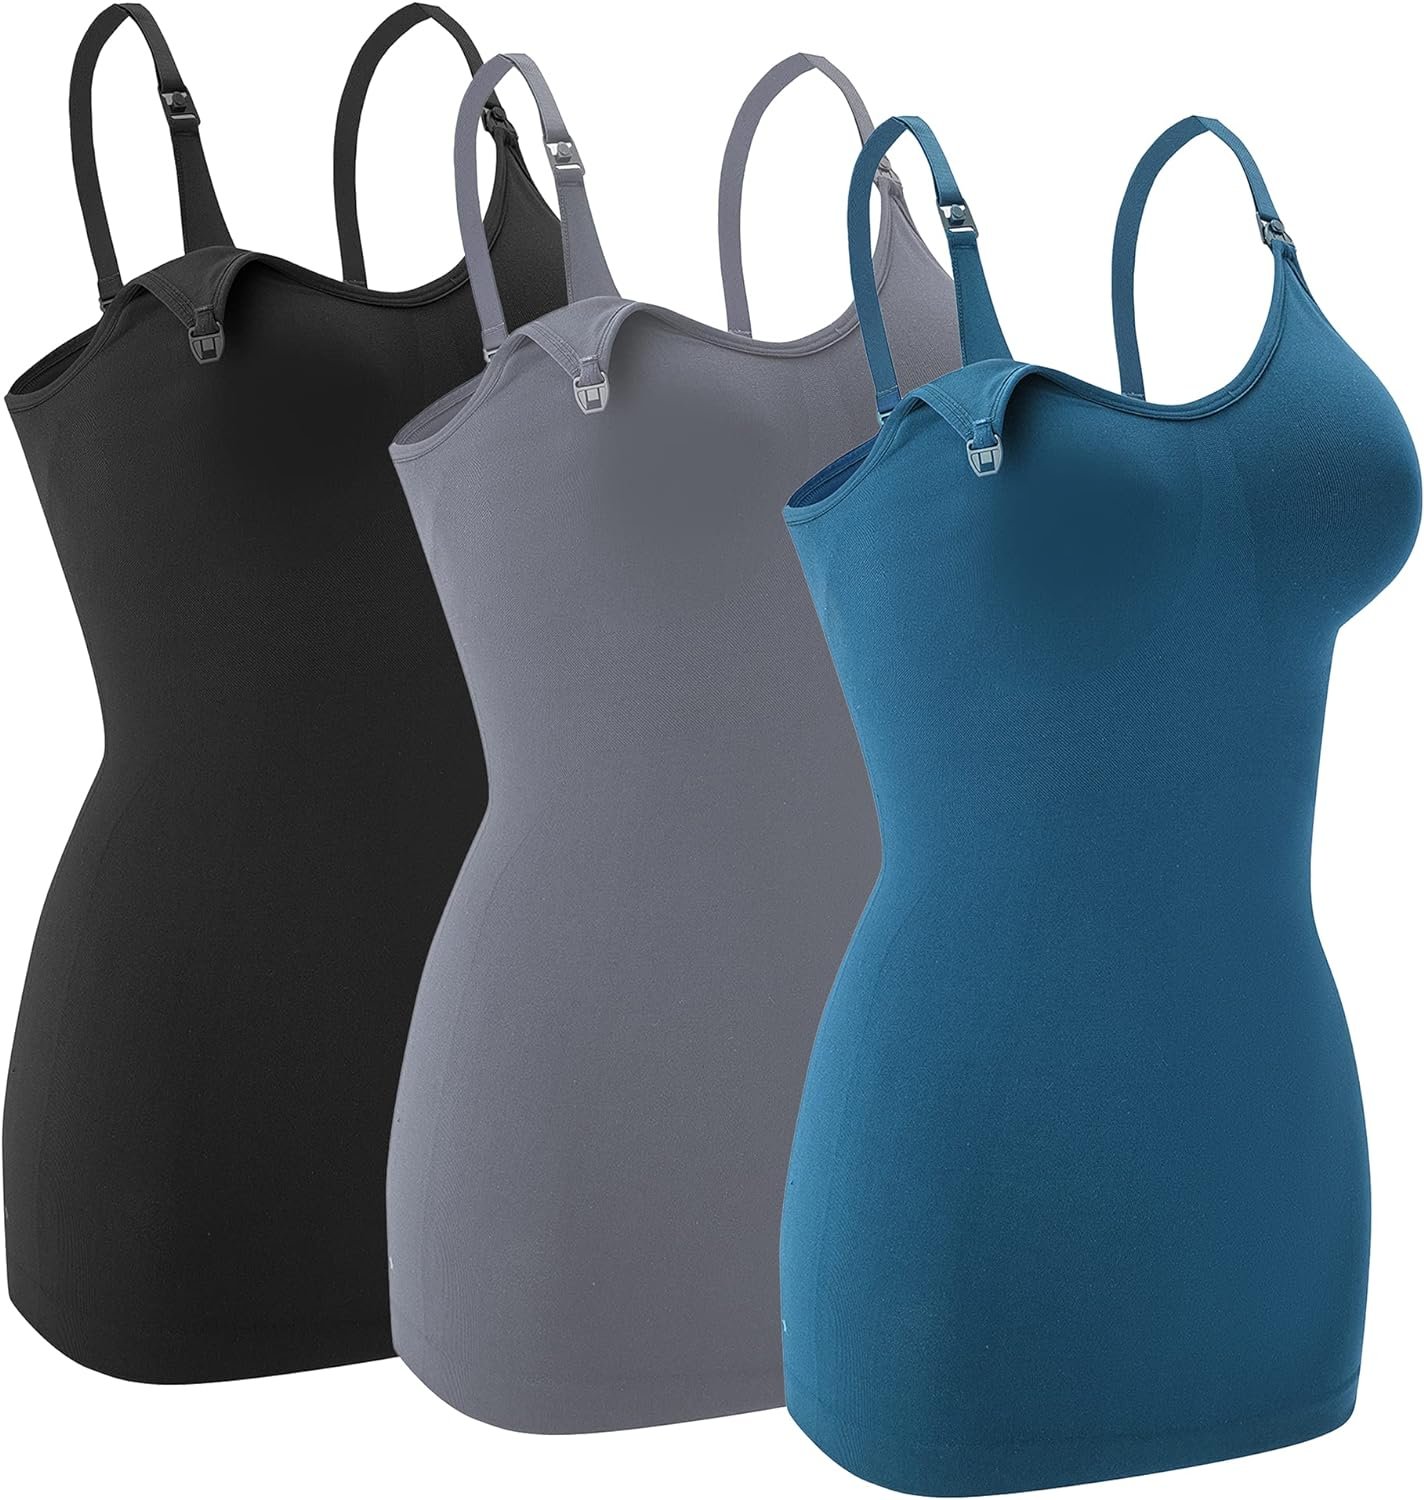 Nursing Tank Tops for Breastfeeding - Pregnancy Must Haves Maternity Camisoles with Built in Bra